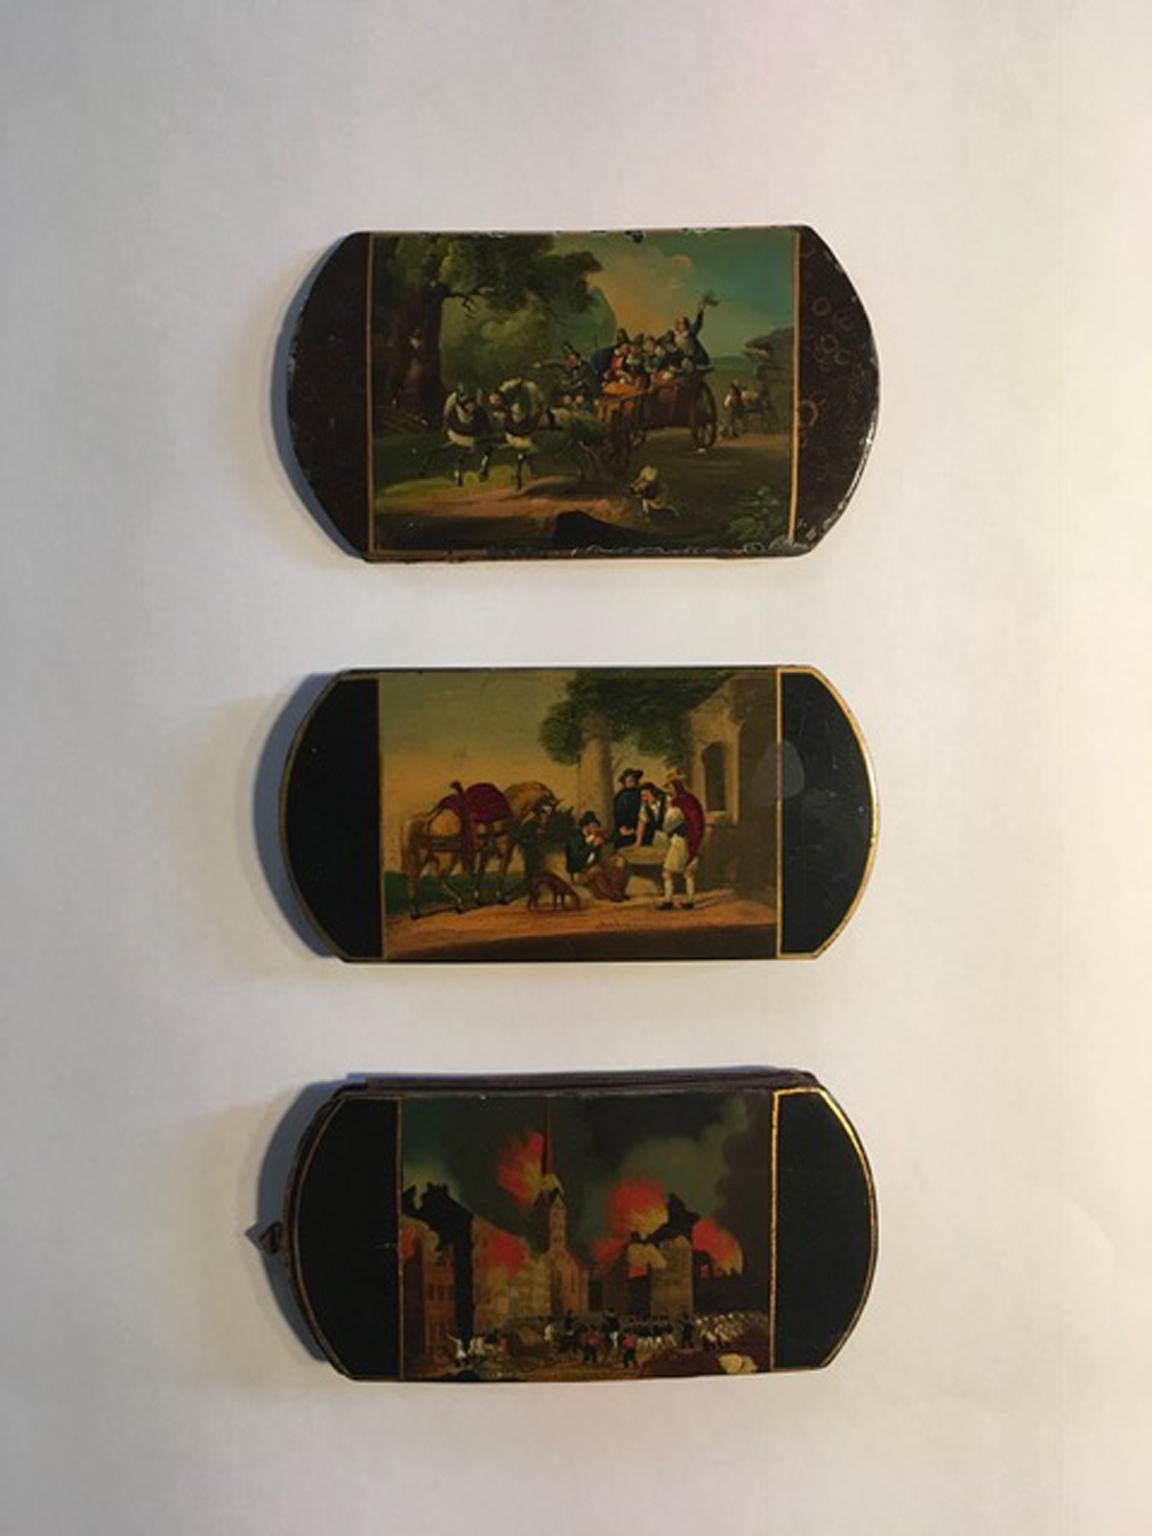 These fine wood lacquered boxes are in Baroque style. There are natural landscape and one of these has the scene of the fire in the town of Edimburgh.
The paintings are very detailed as a Flemish painting can be

The provenience should be